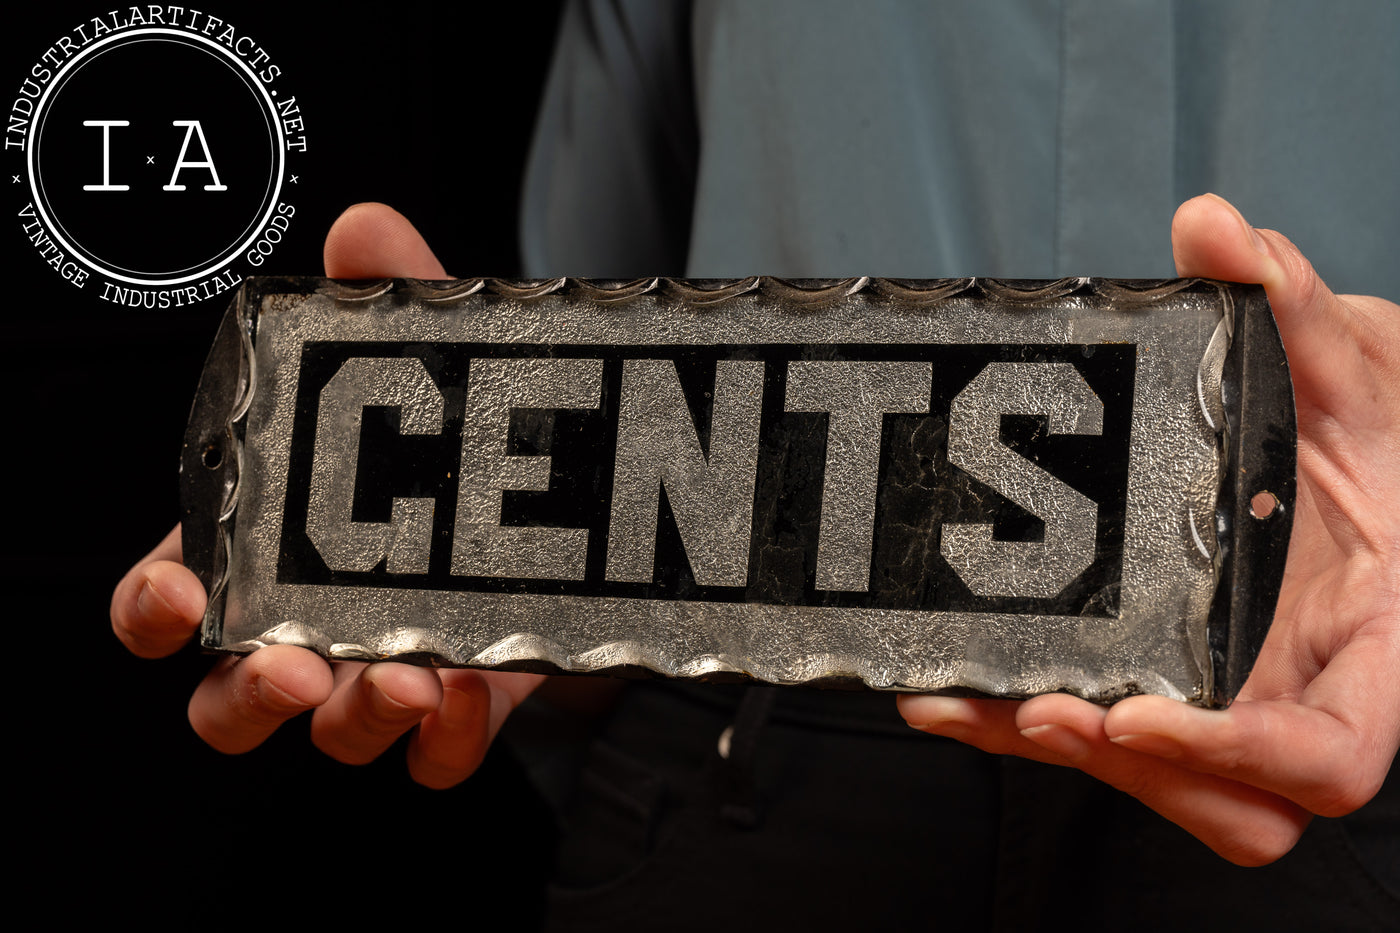 Scalloped Glass "GENTS" Sign